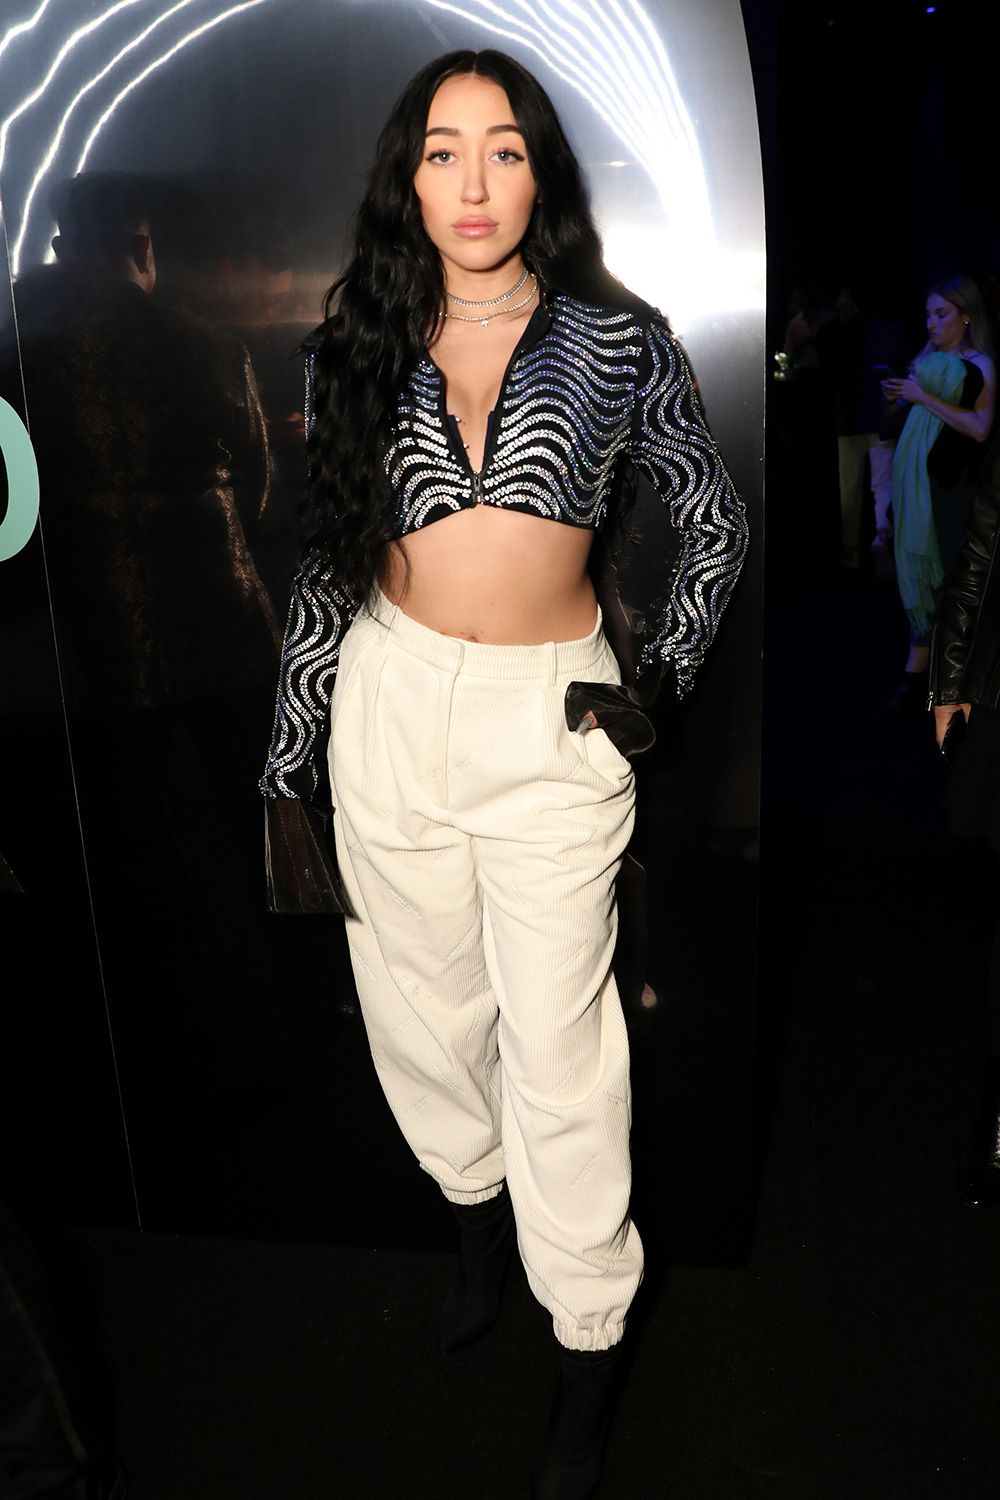 Noah Cyrus attends Spotify Hosts "Best New Artist" Party at The Lot Studios on January 23, 2020 in Los Angeles, California